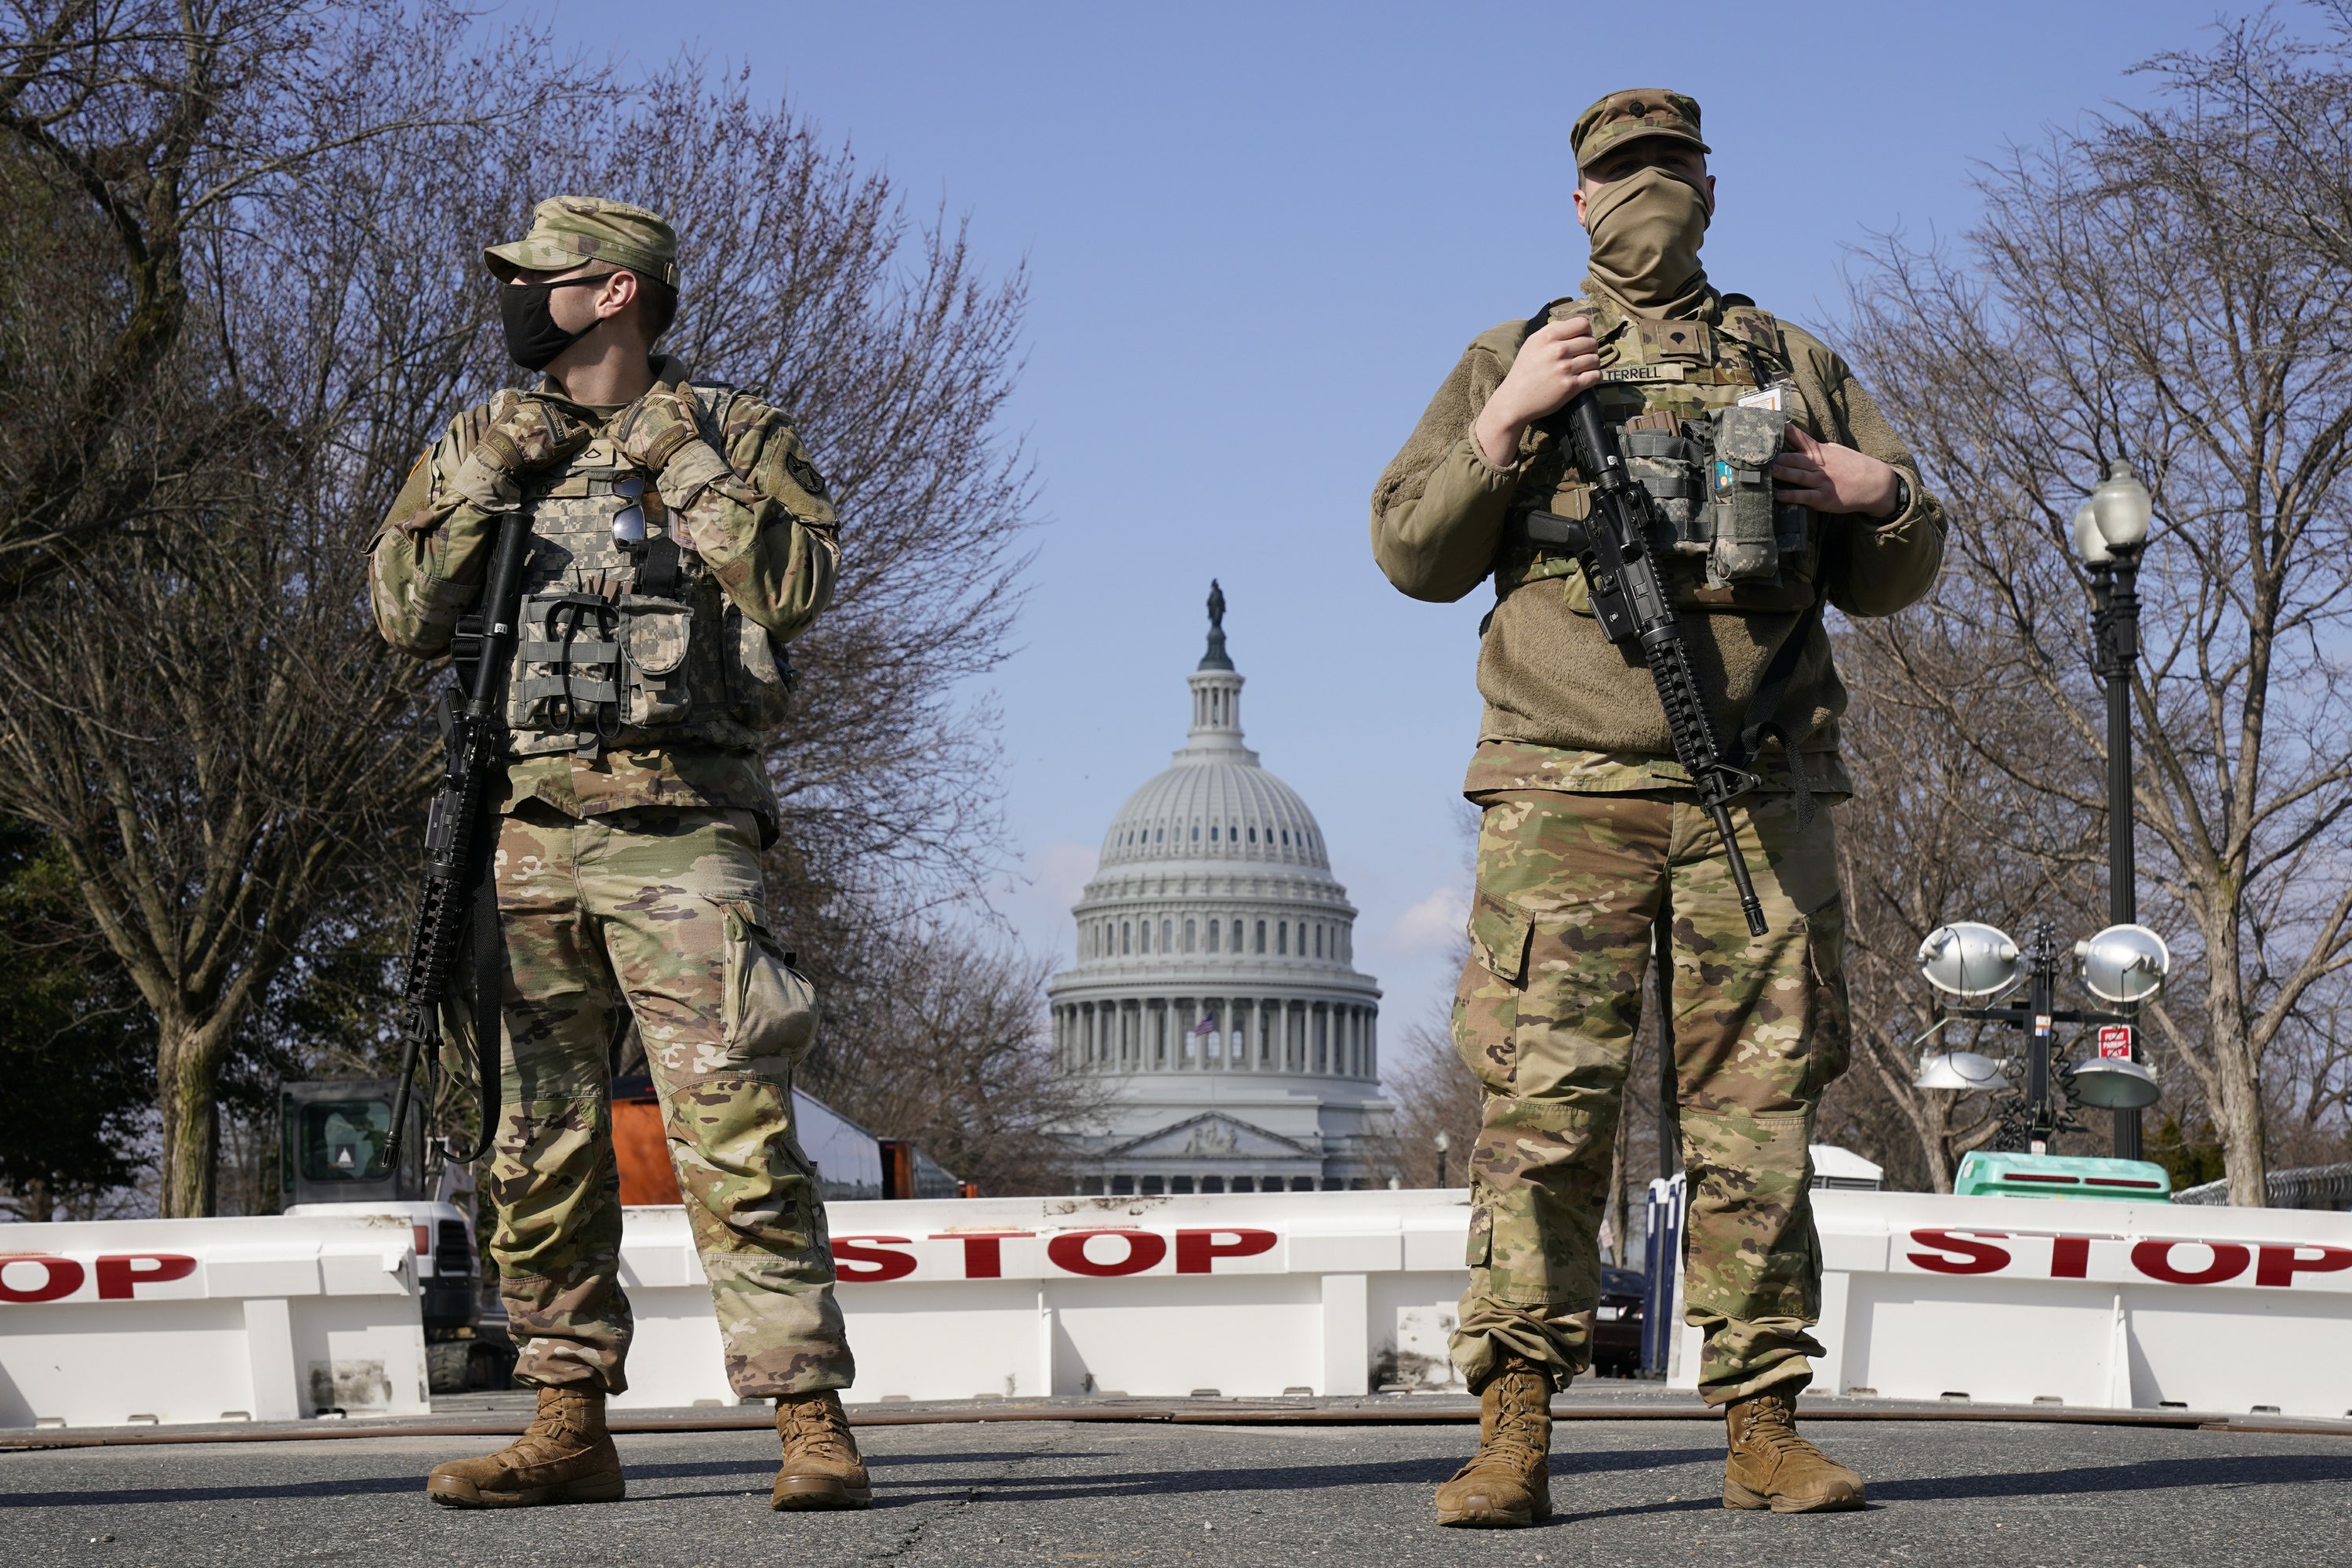 Law enforcement on alert after warning at the US Capitol